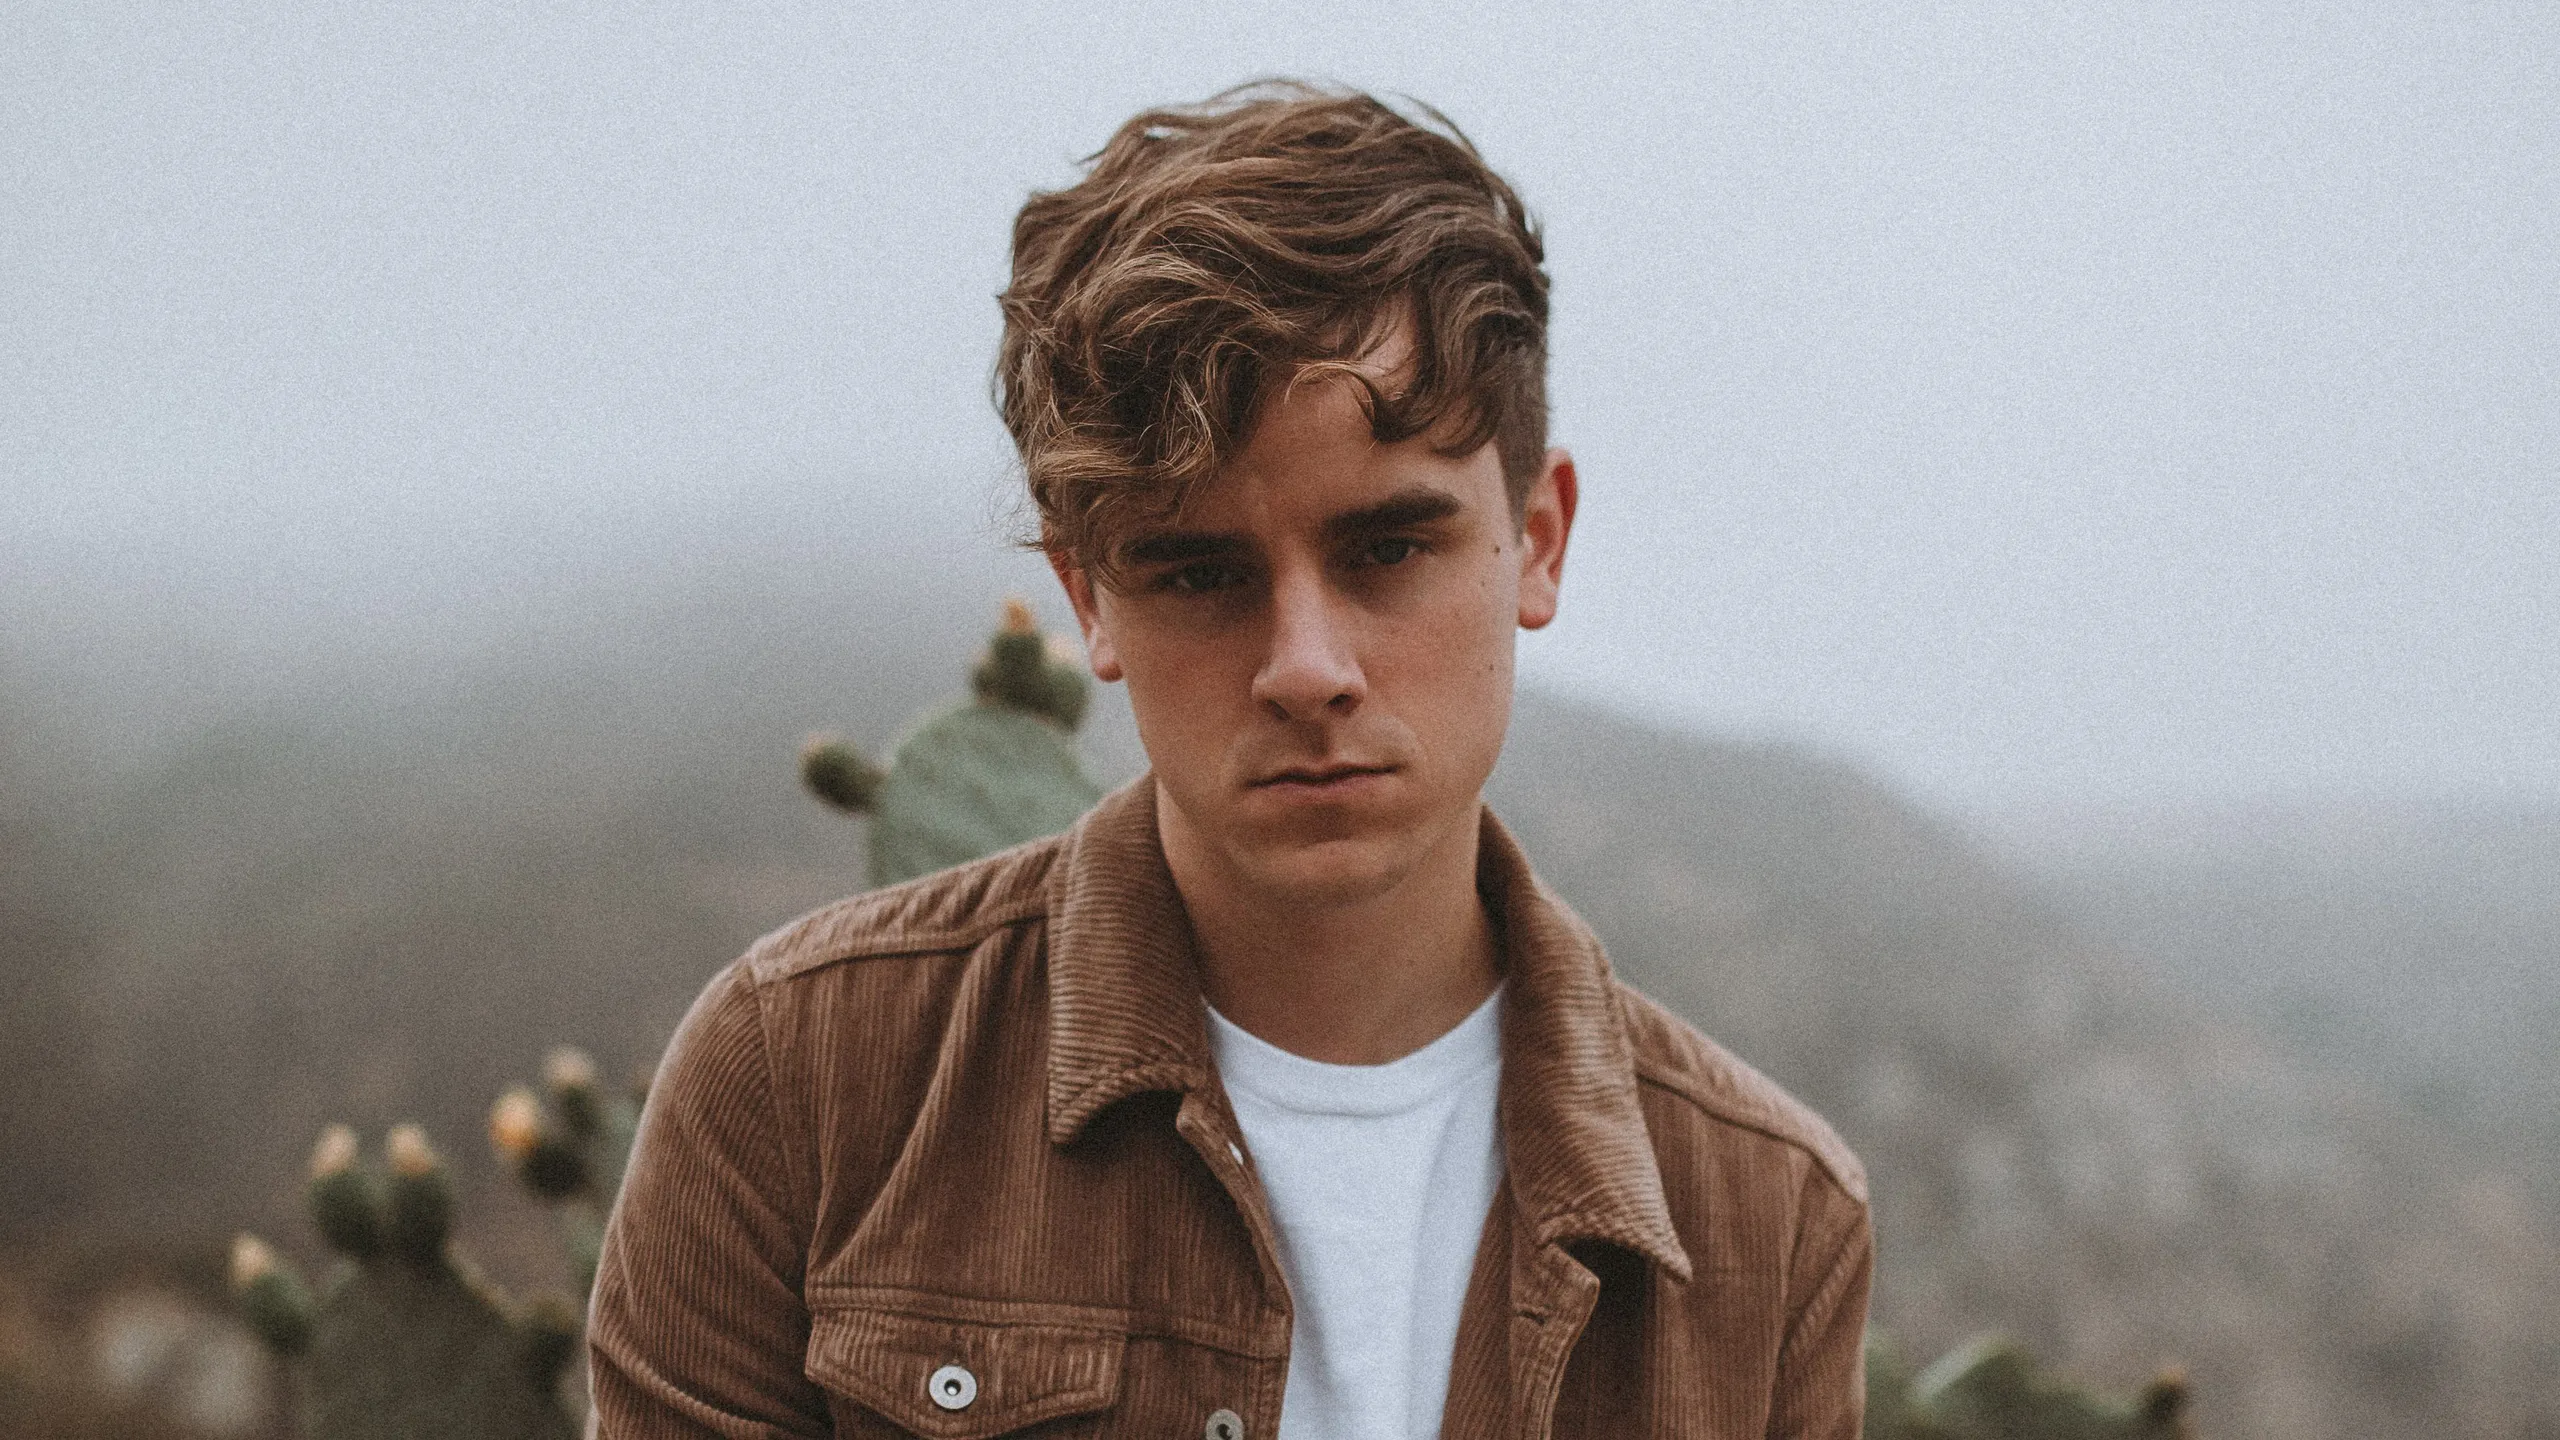 25-astounding-facts-about-connor-franta